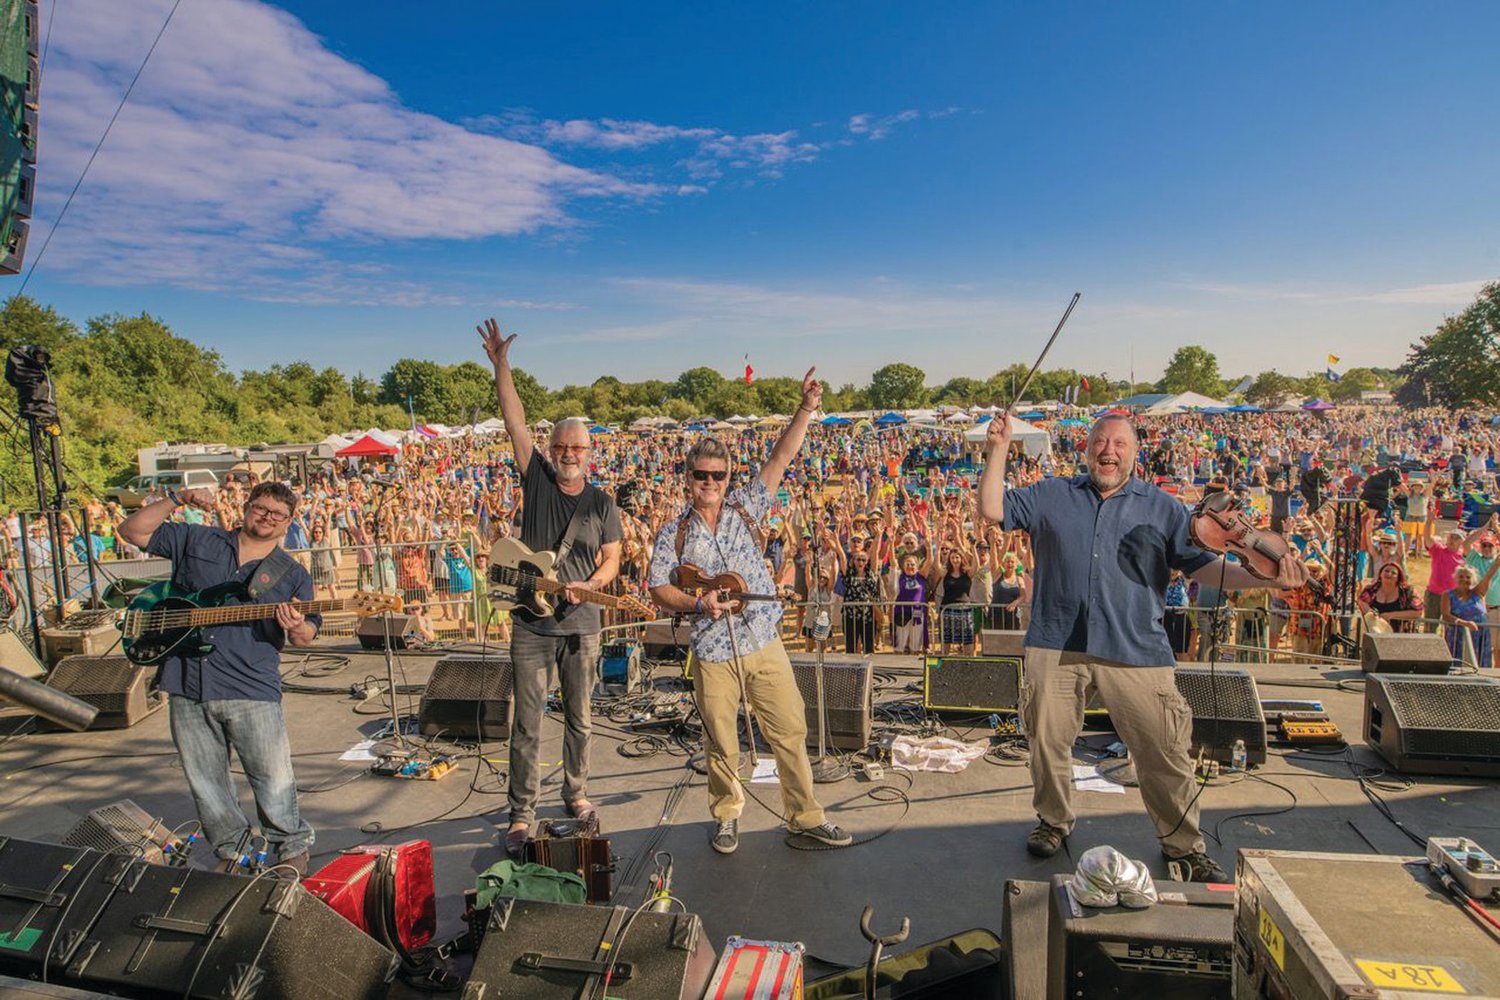 BACK IN RHYTHM: Rhythm & Roots, which has been going strong since 1998 under the direction of the Wentworth family, returns this year for three days of music in Charlestown.